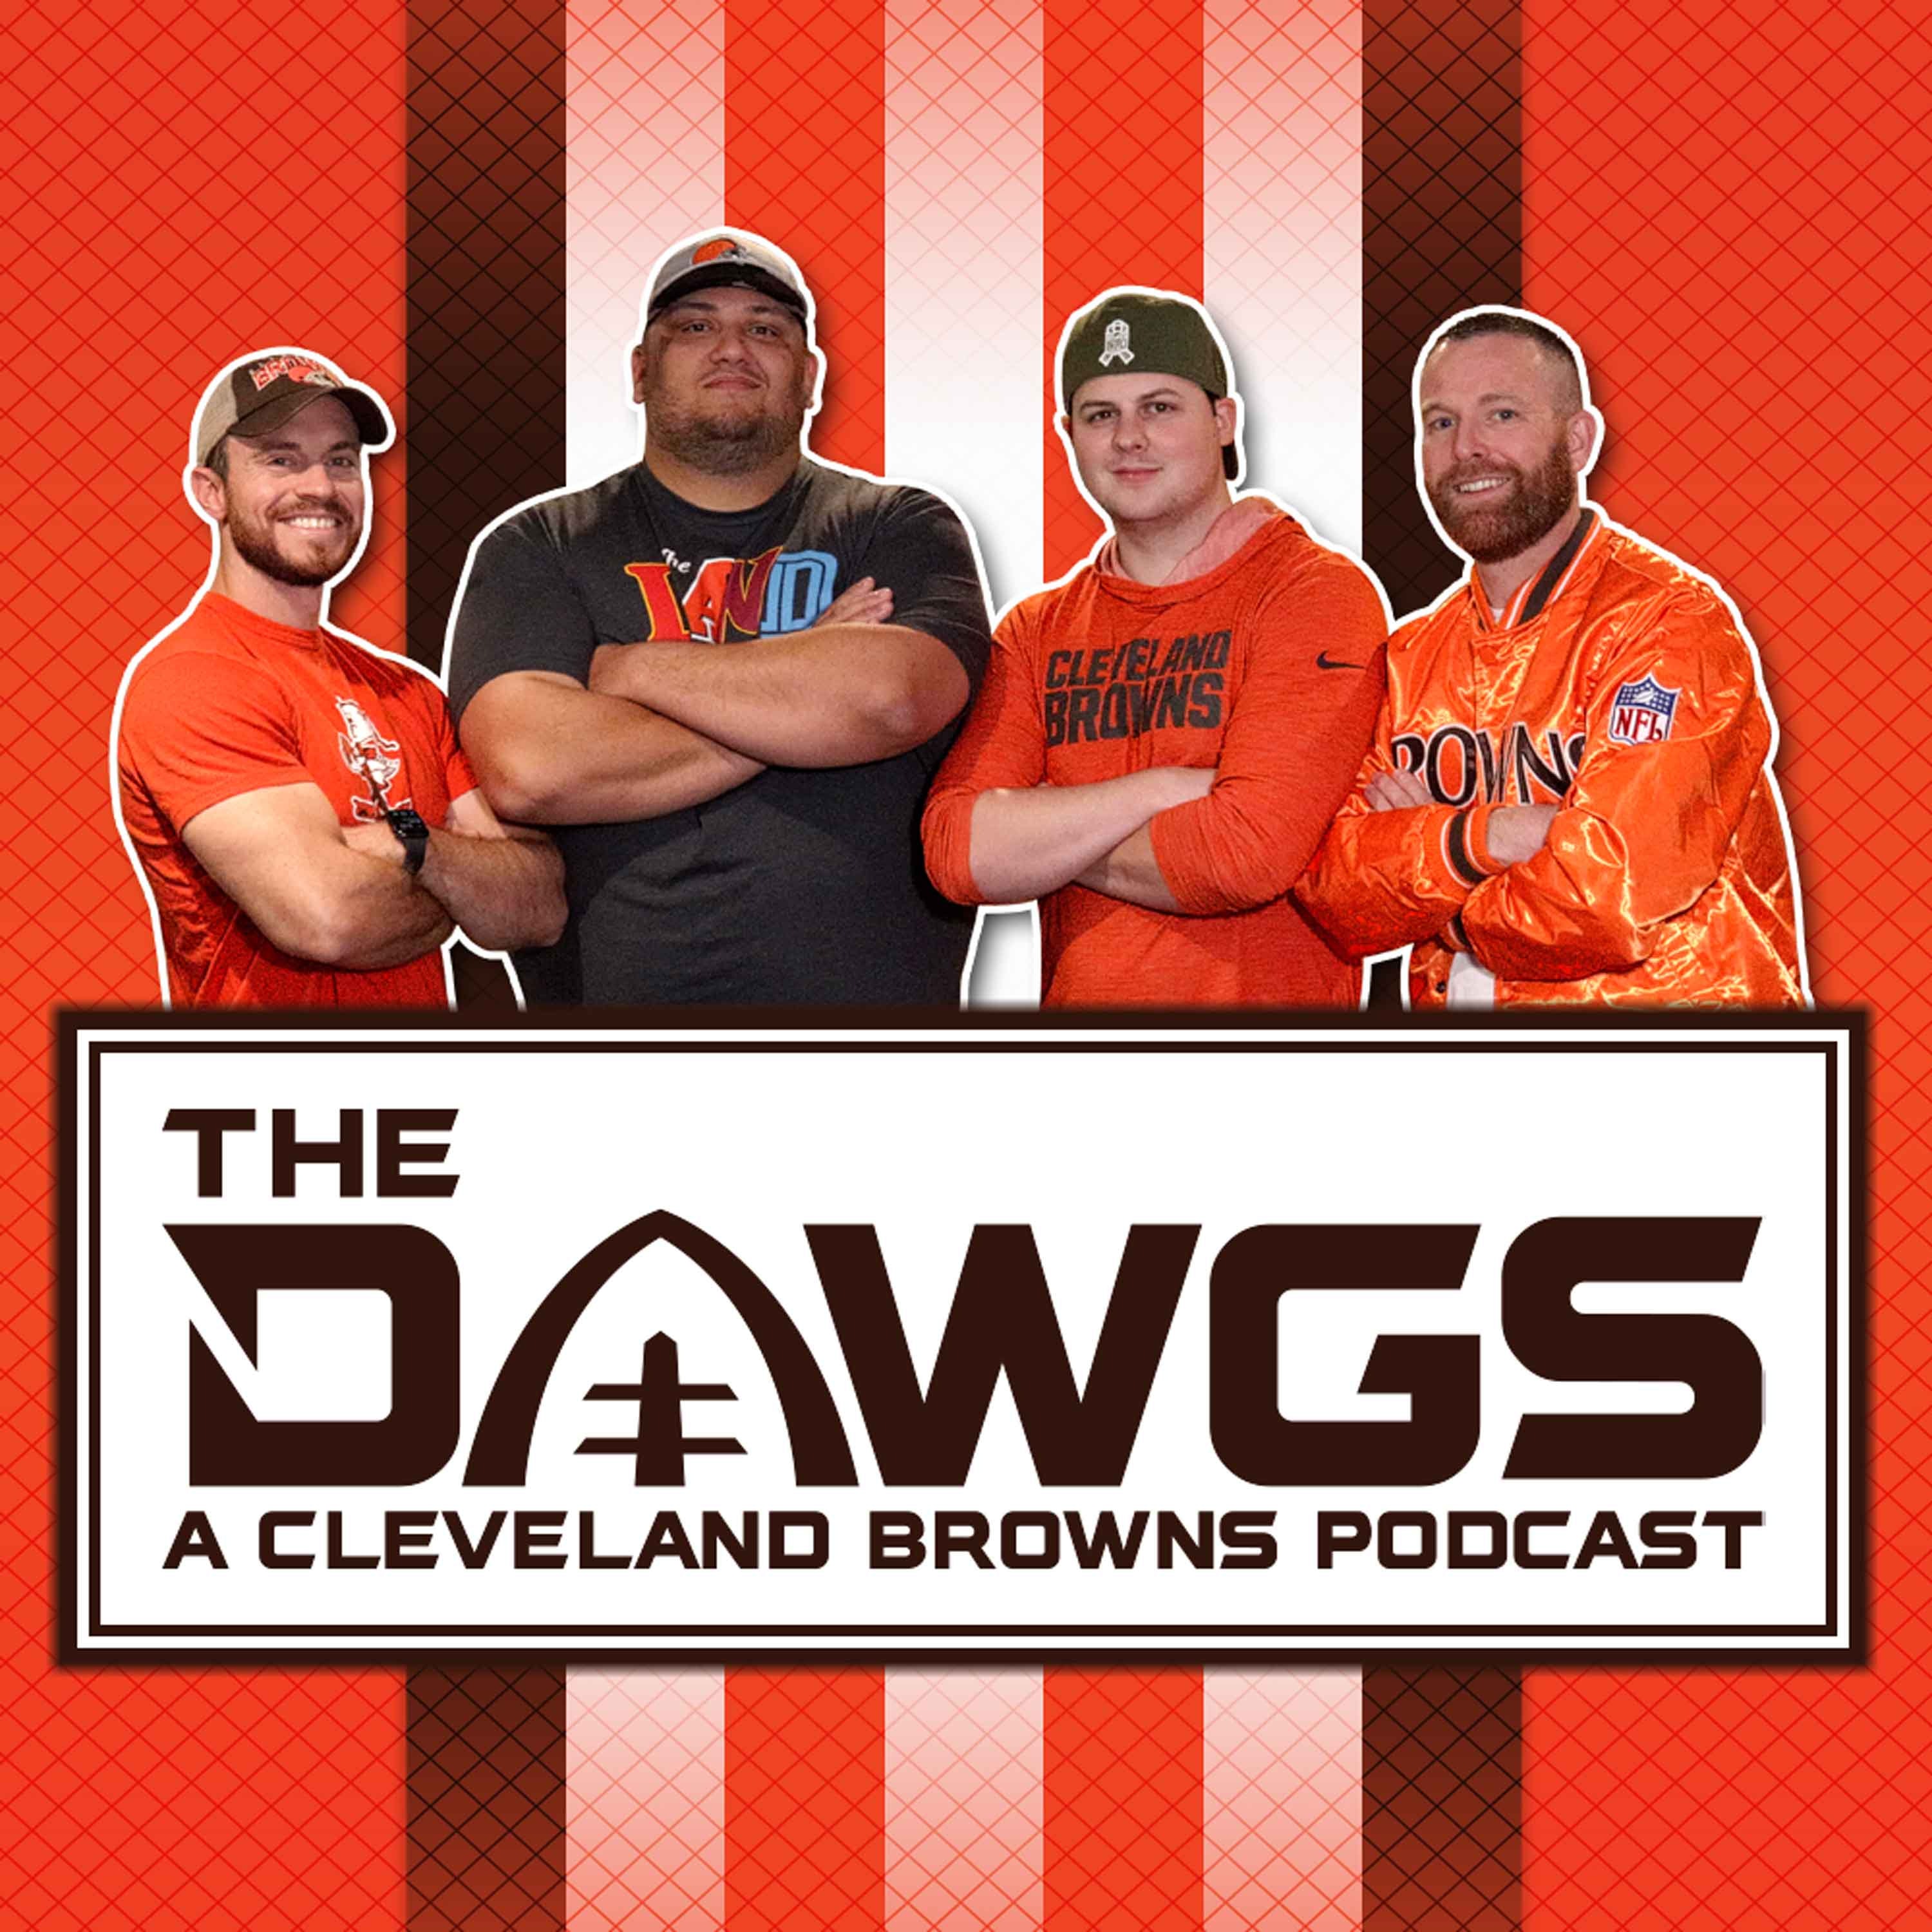 Week 13 LIVE - 3rd Quarter- Cleveland Browns at Houston Texans  | The Dawgs - A Cleveland Browns Podcast - December 4, 2022